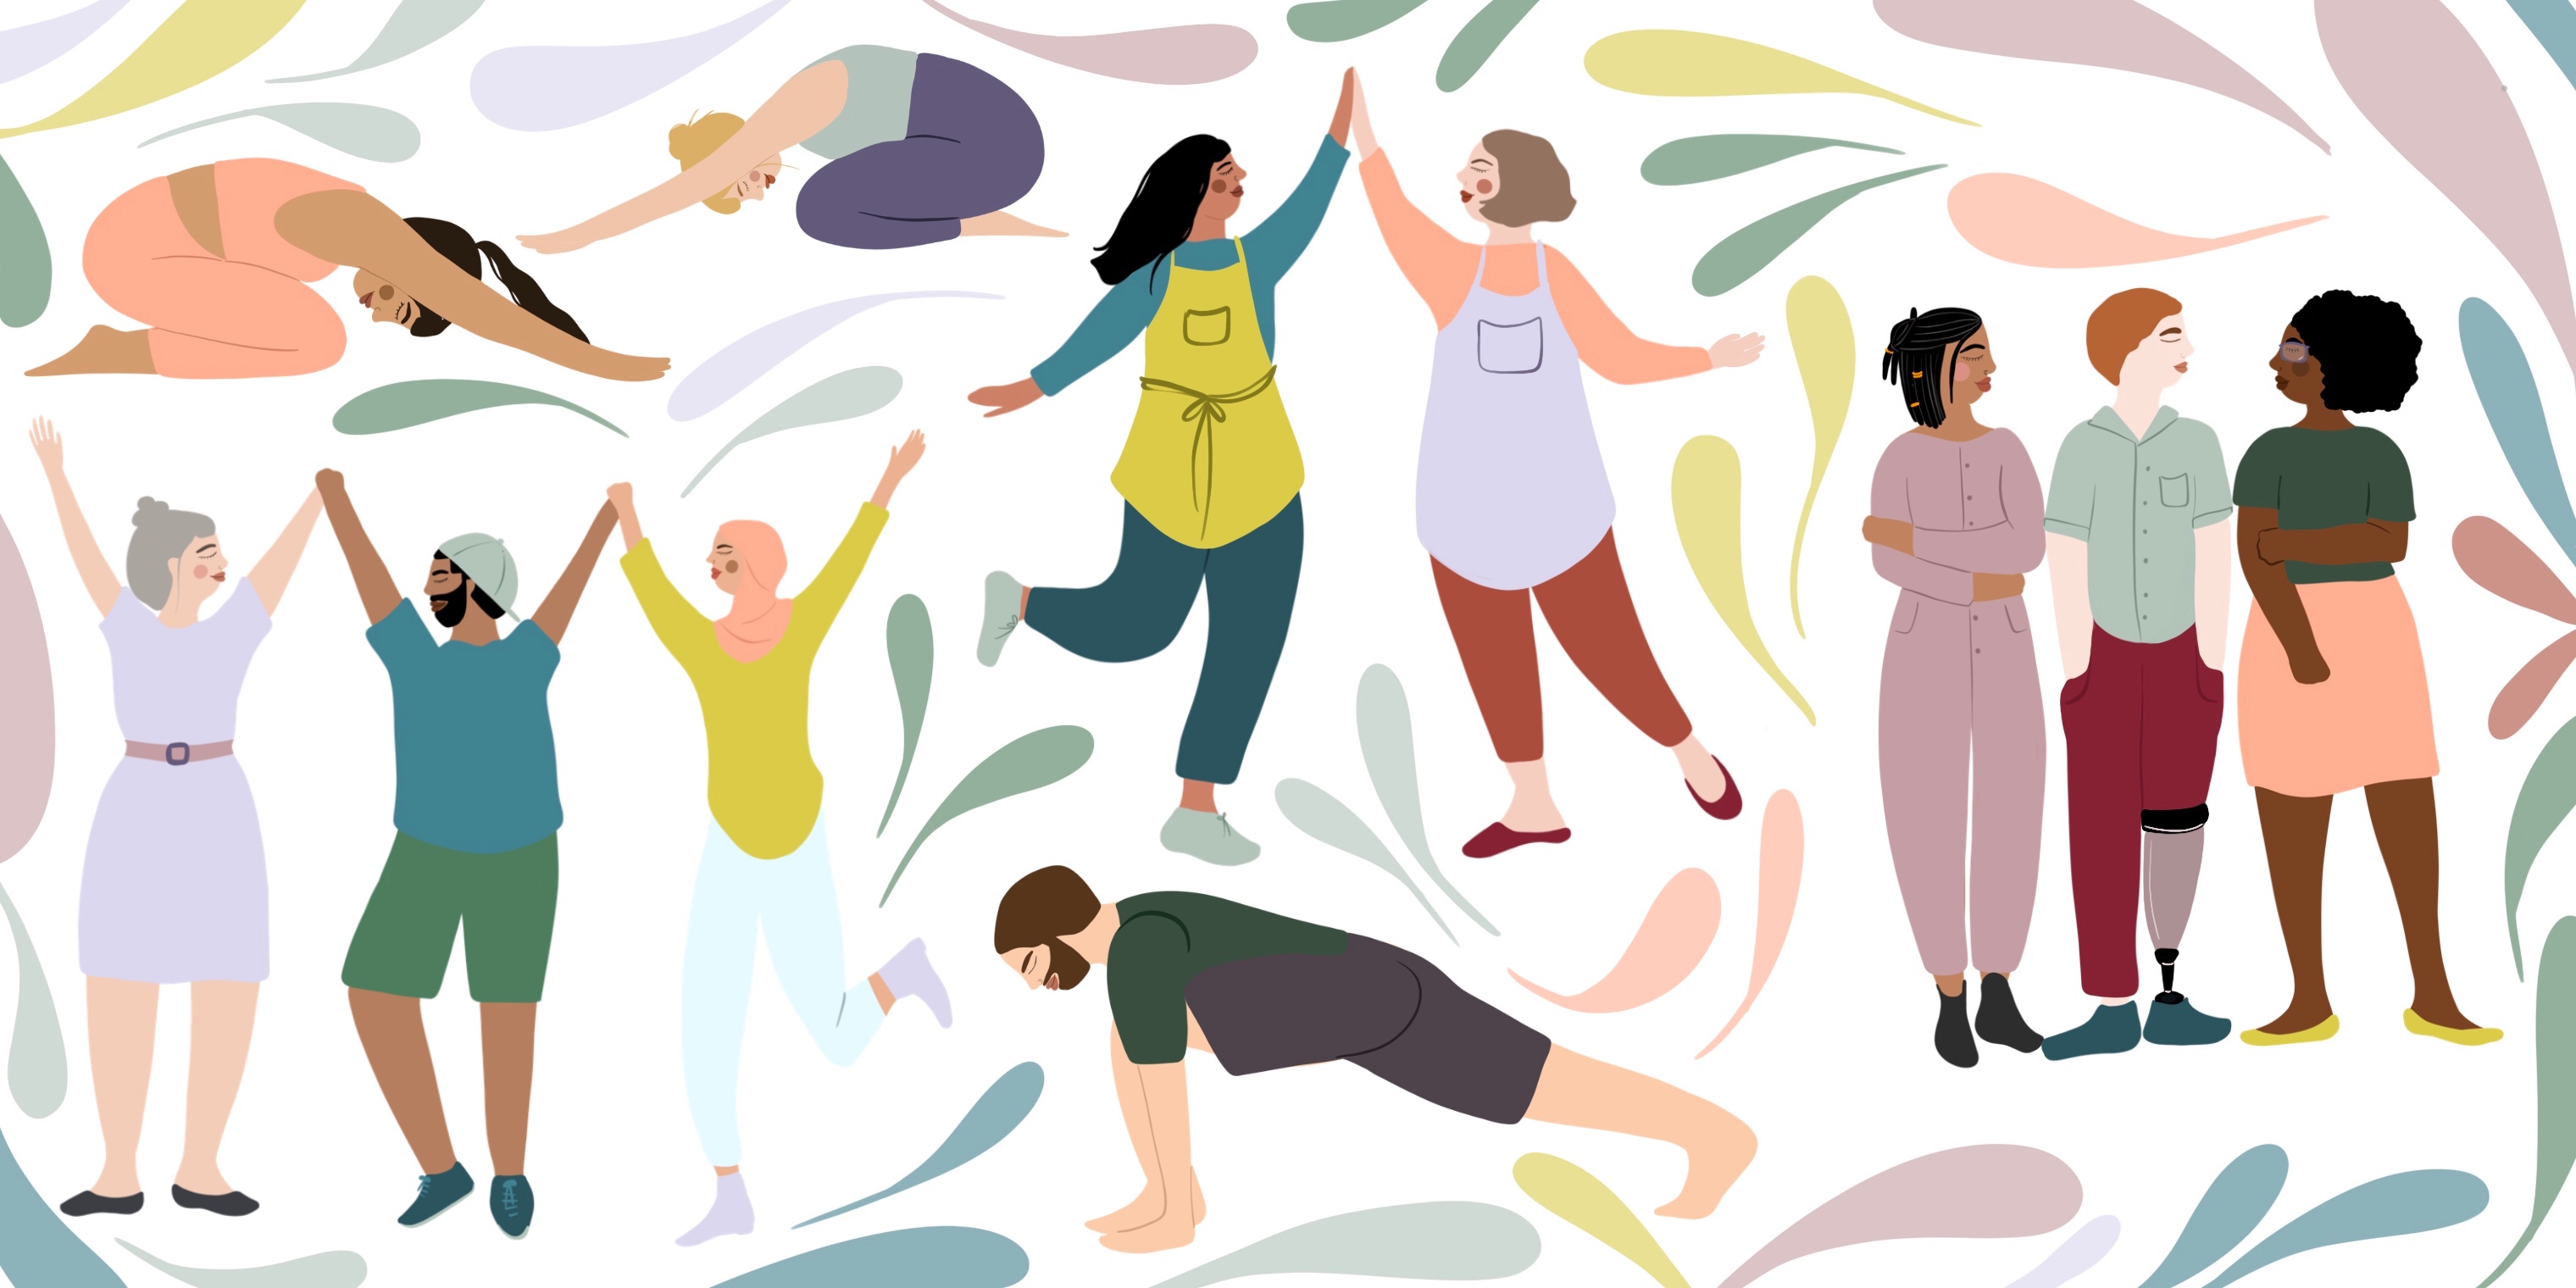 Illustrations of a diverse group of people in yoga poses and celebrating